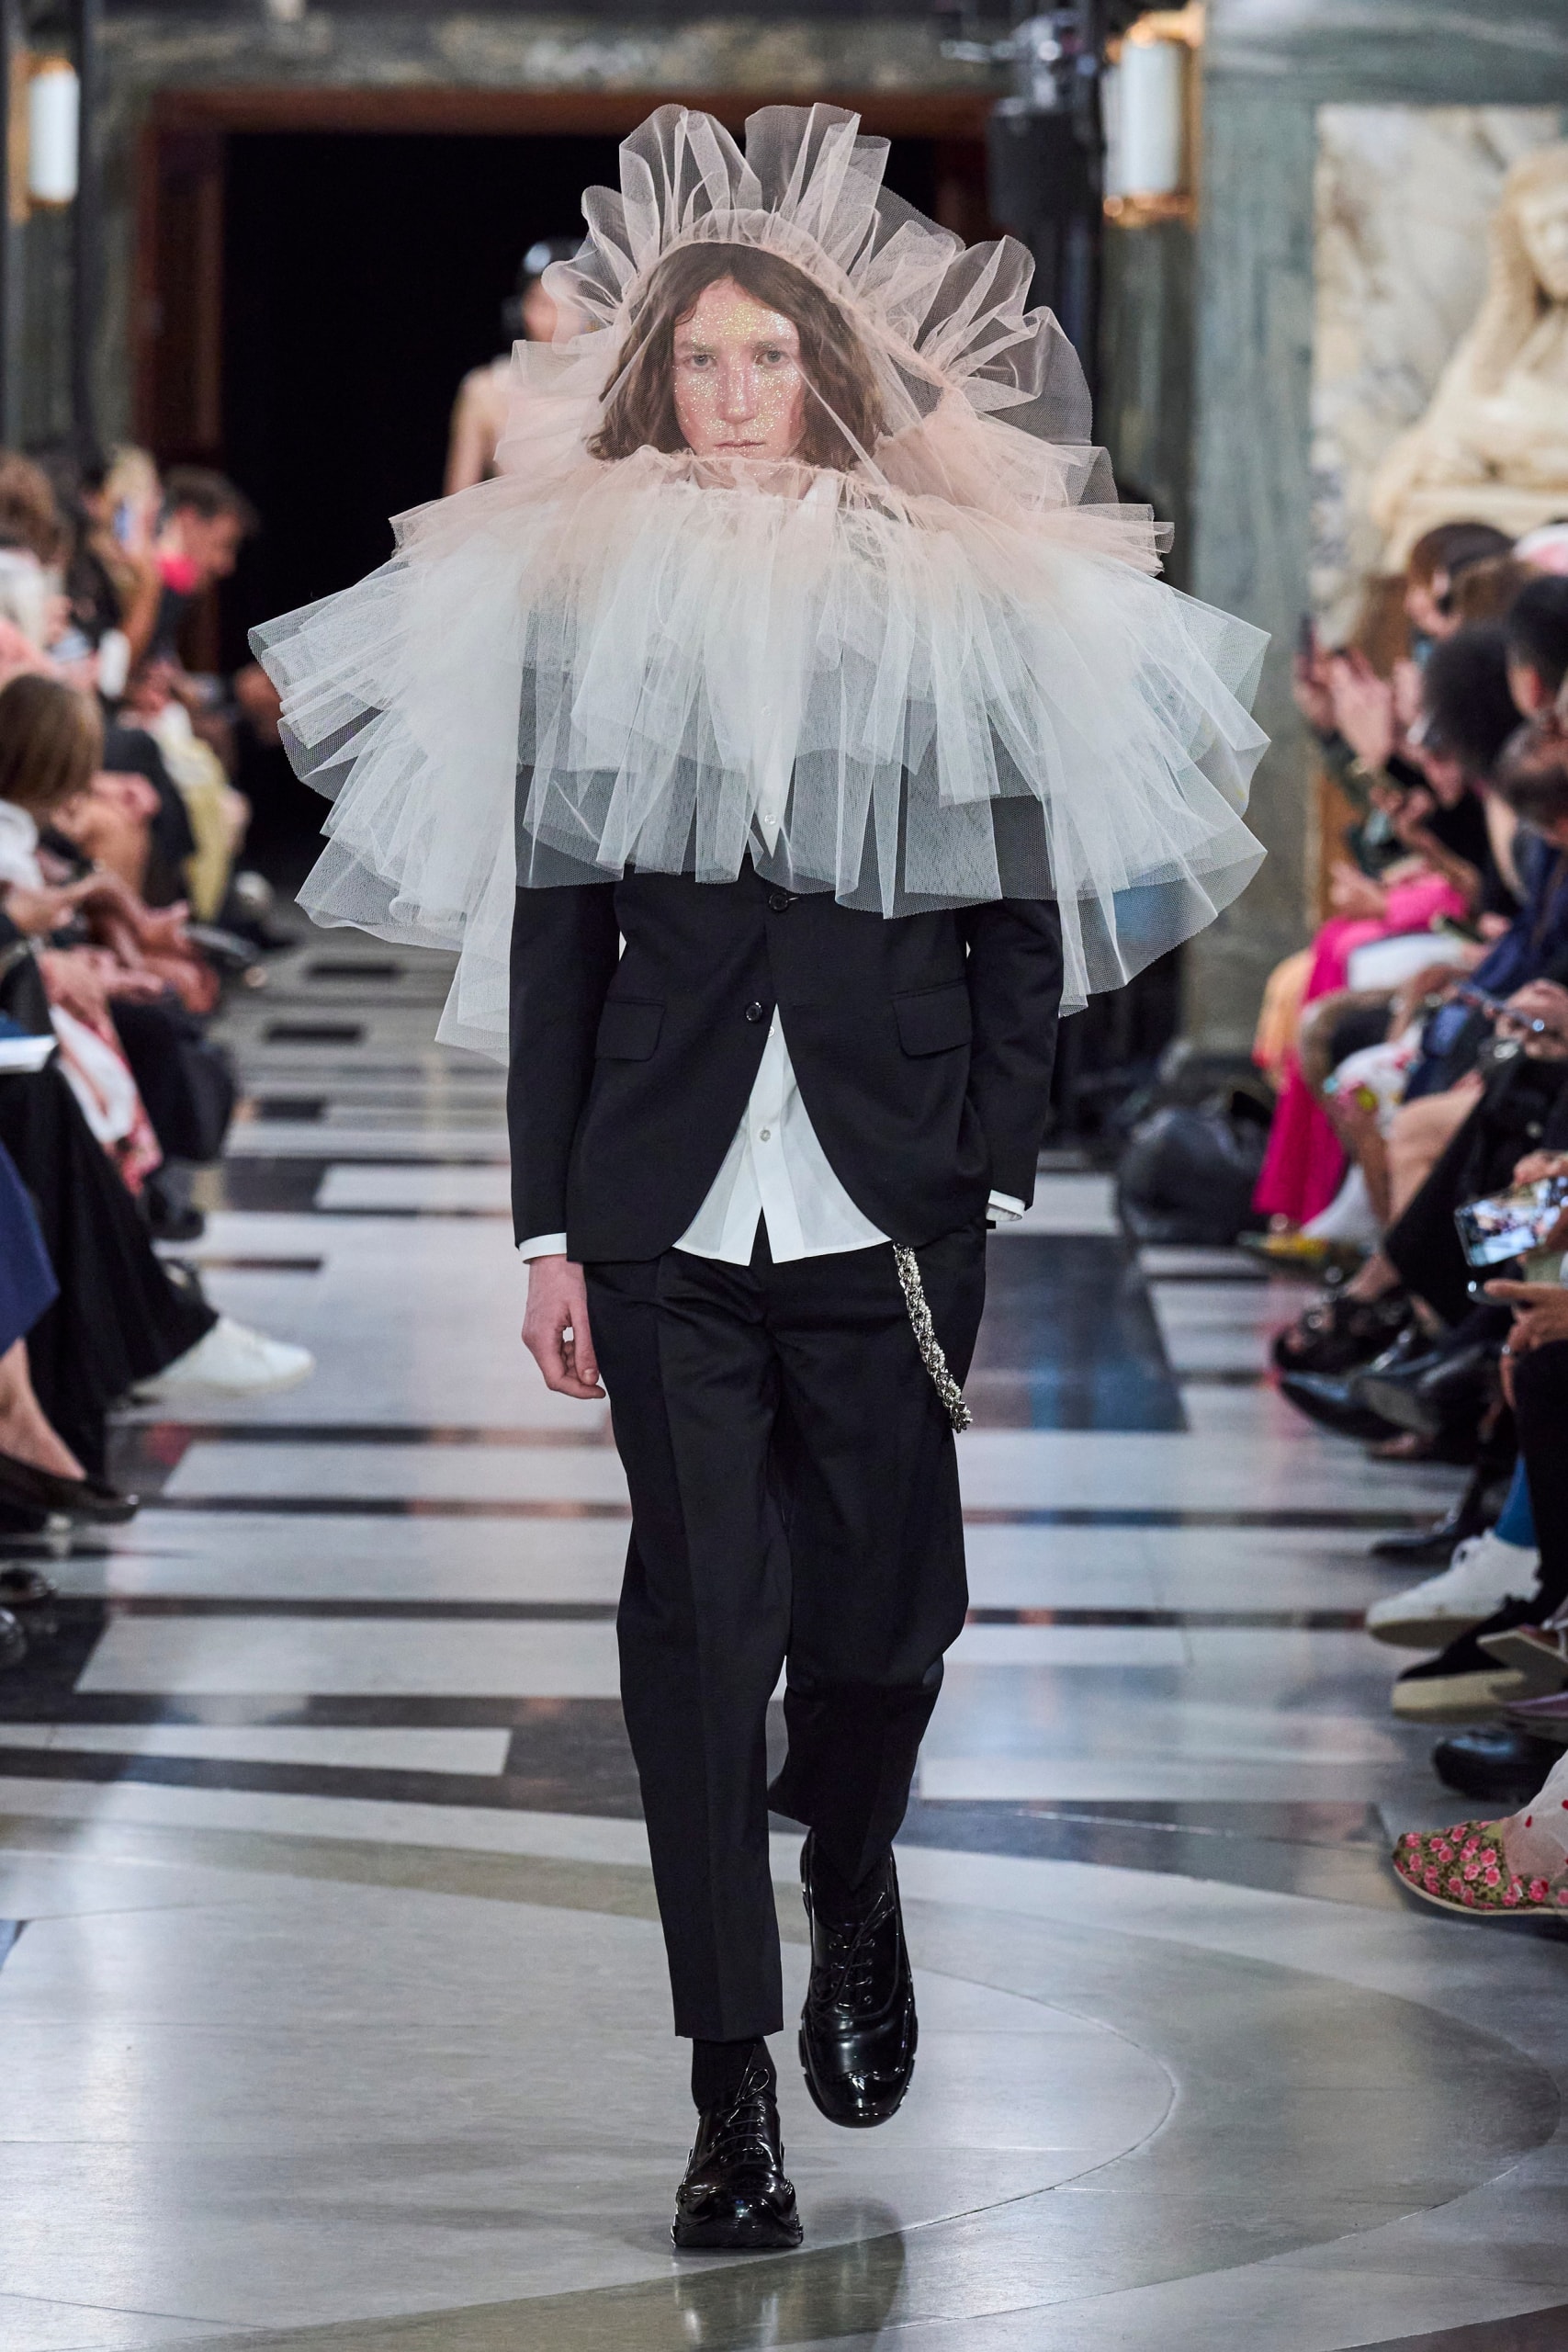 Simone Rocha debuts first fully-formed menswear collection at LFW